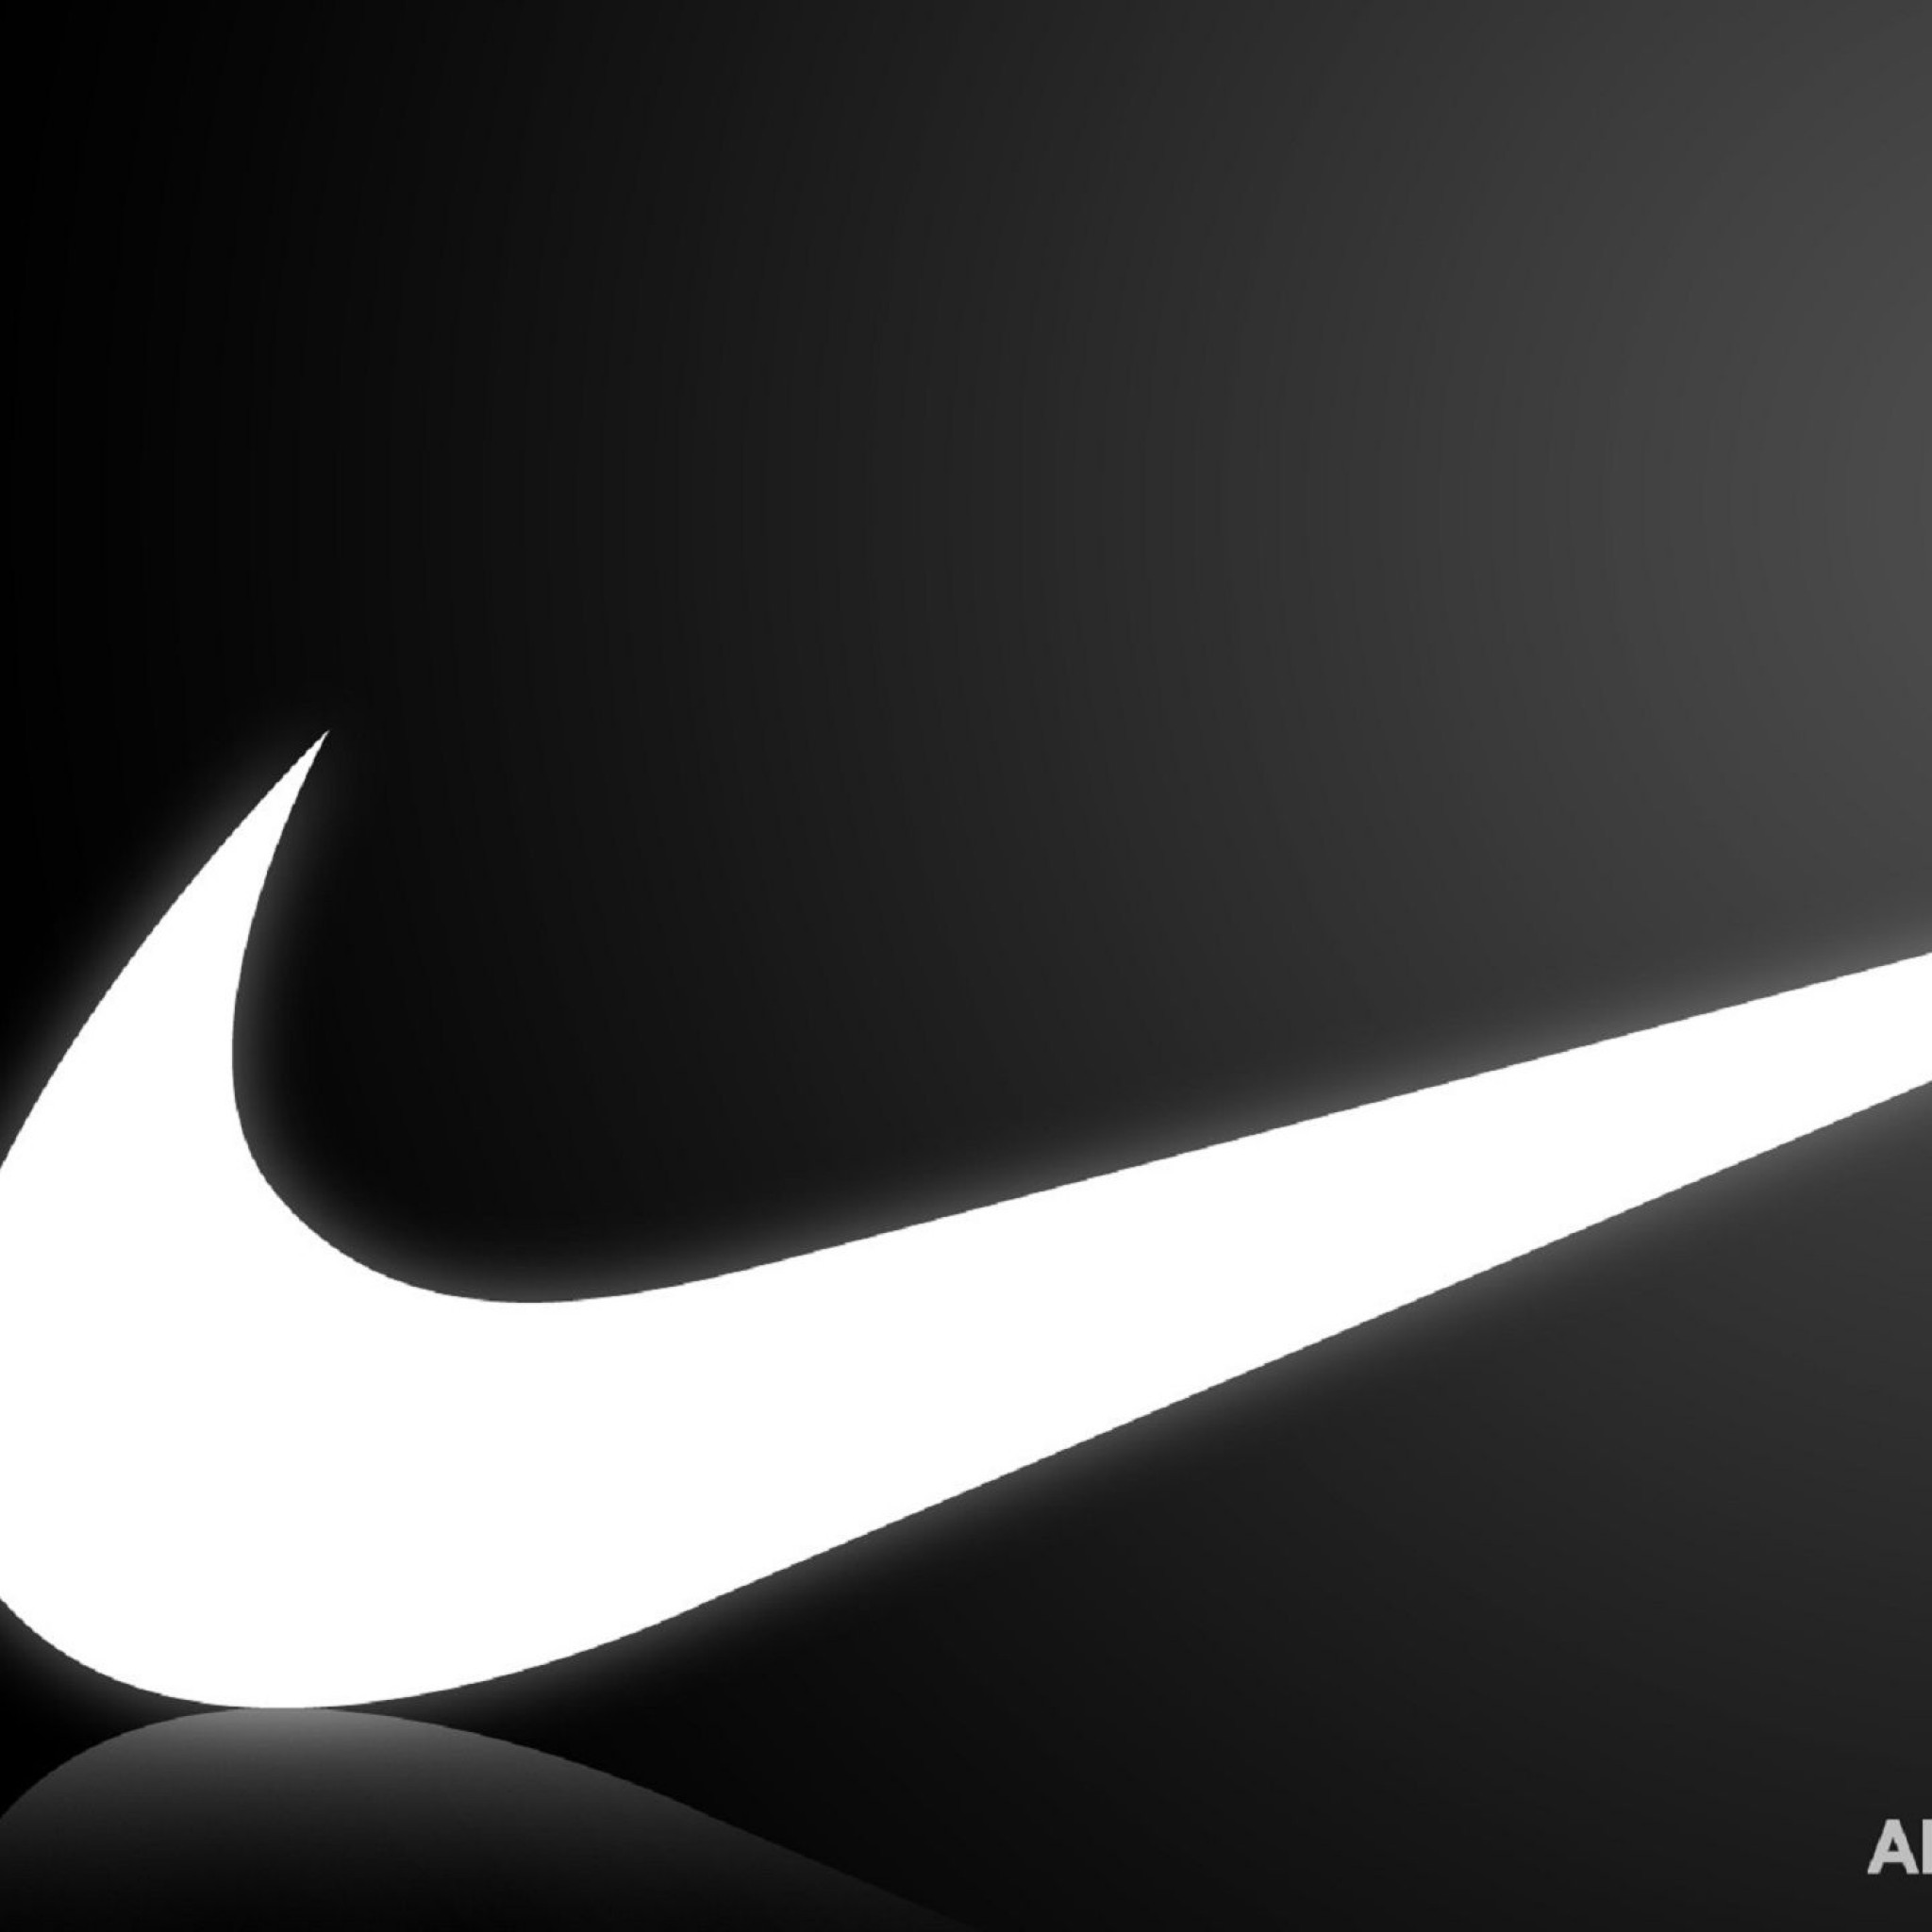 Gold Nike Wallpapers